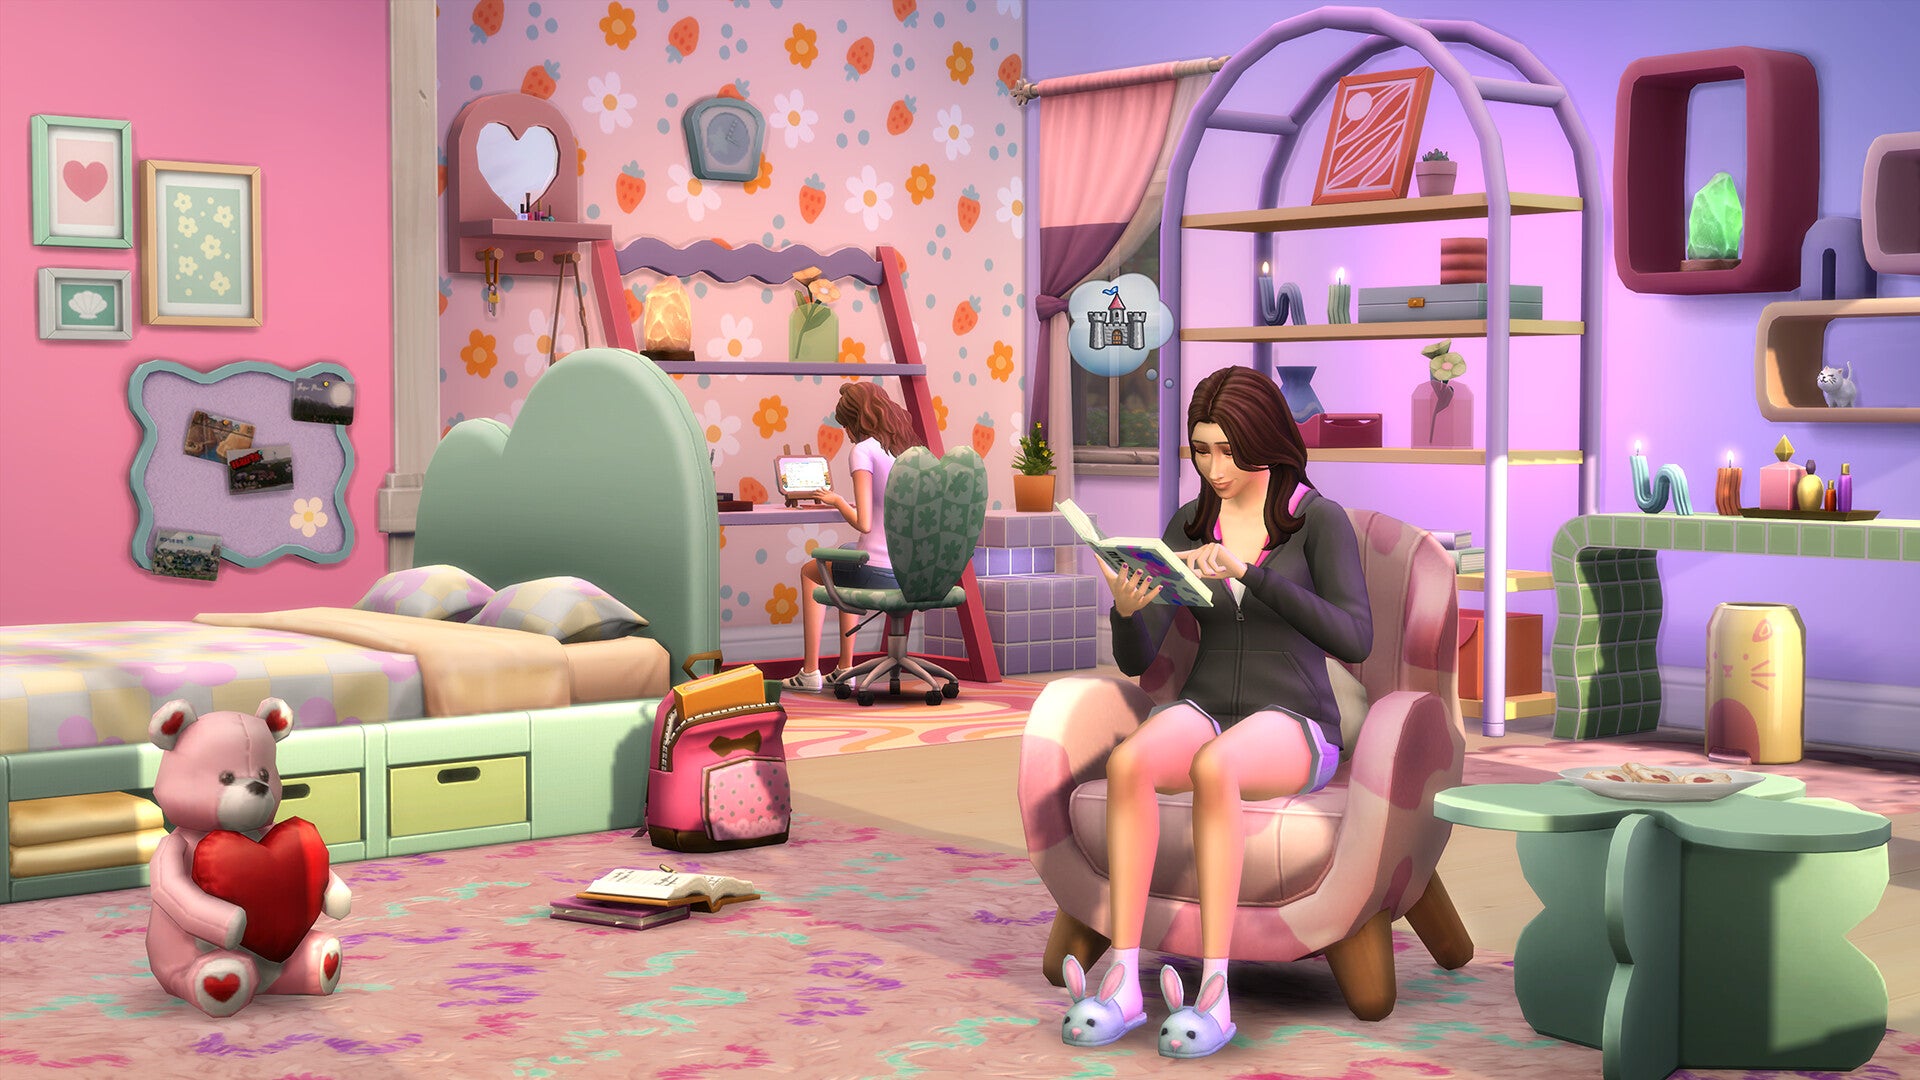 Two young women sit in a pleasant, pastel-colored bedroom-tilt-workshop in The Sims 4: Pastel Pop Kit.